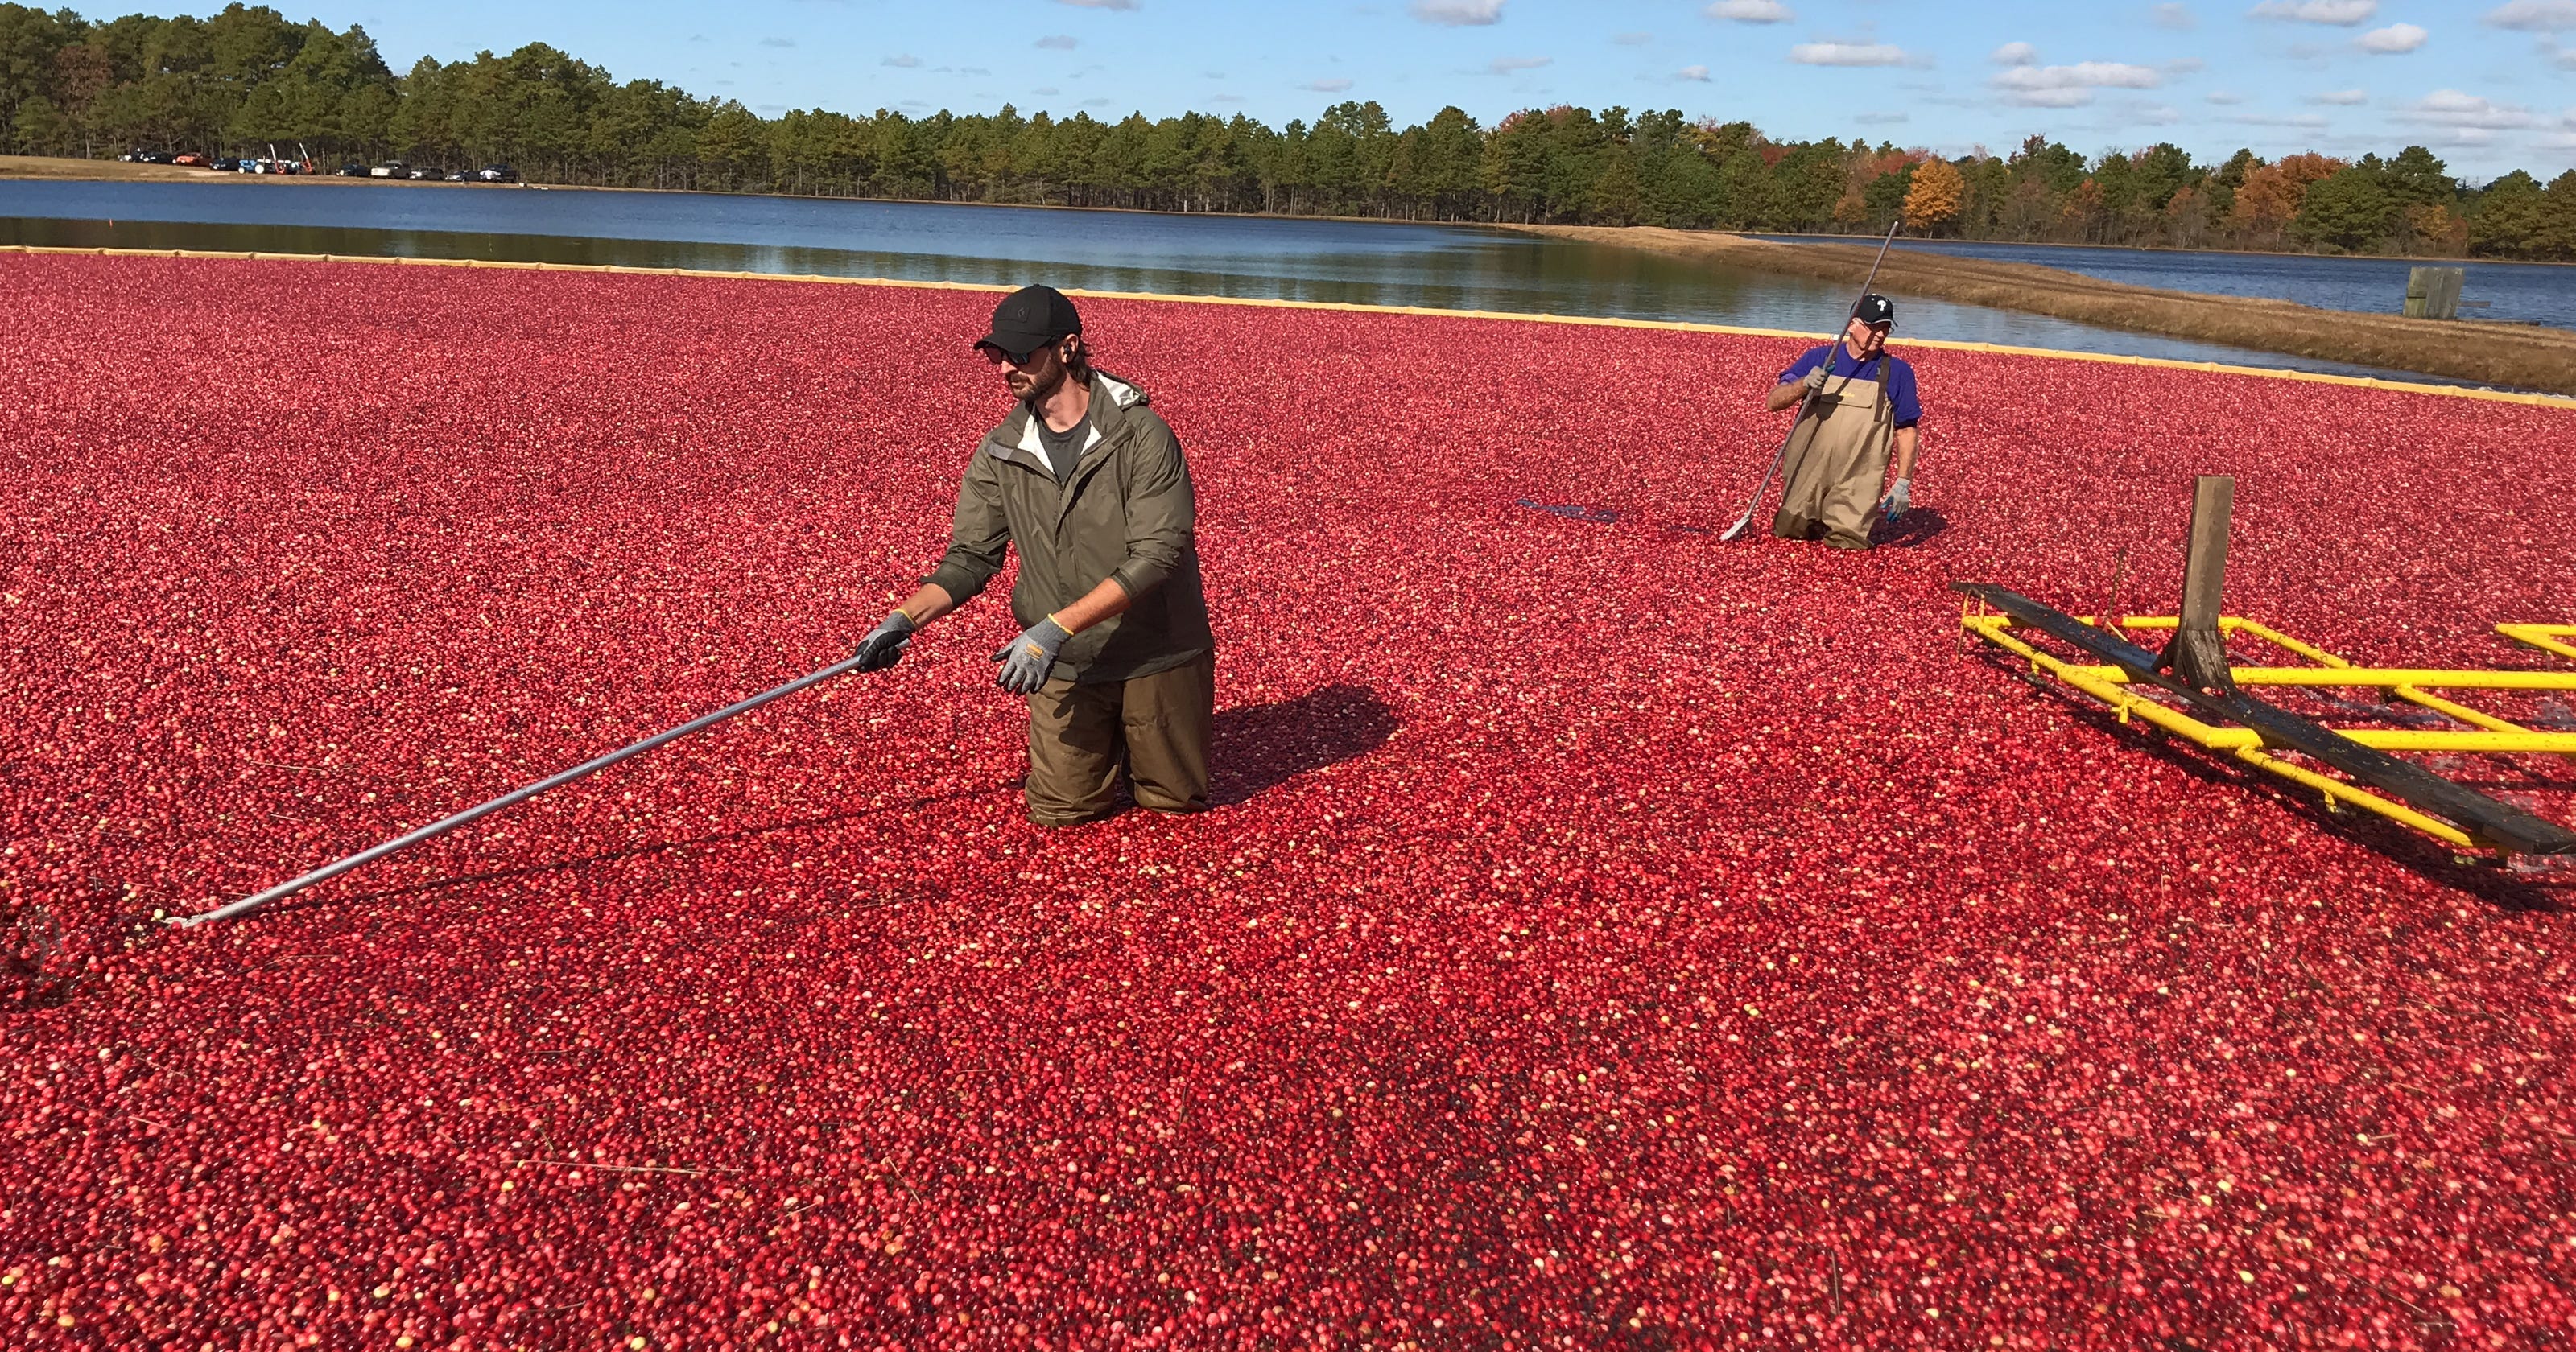 'Too good at growing cranberries' NJ harvest booms, outstrips demand